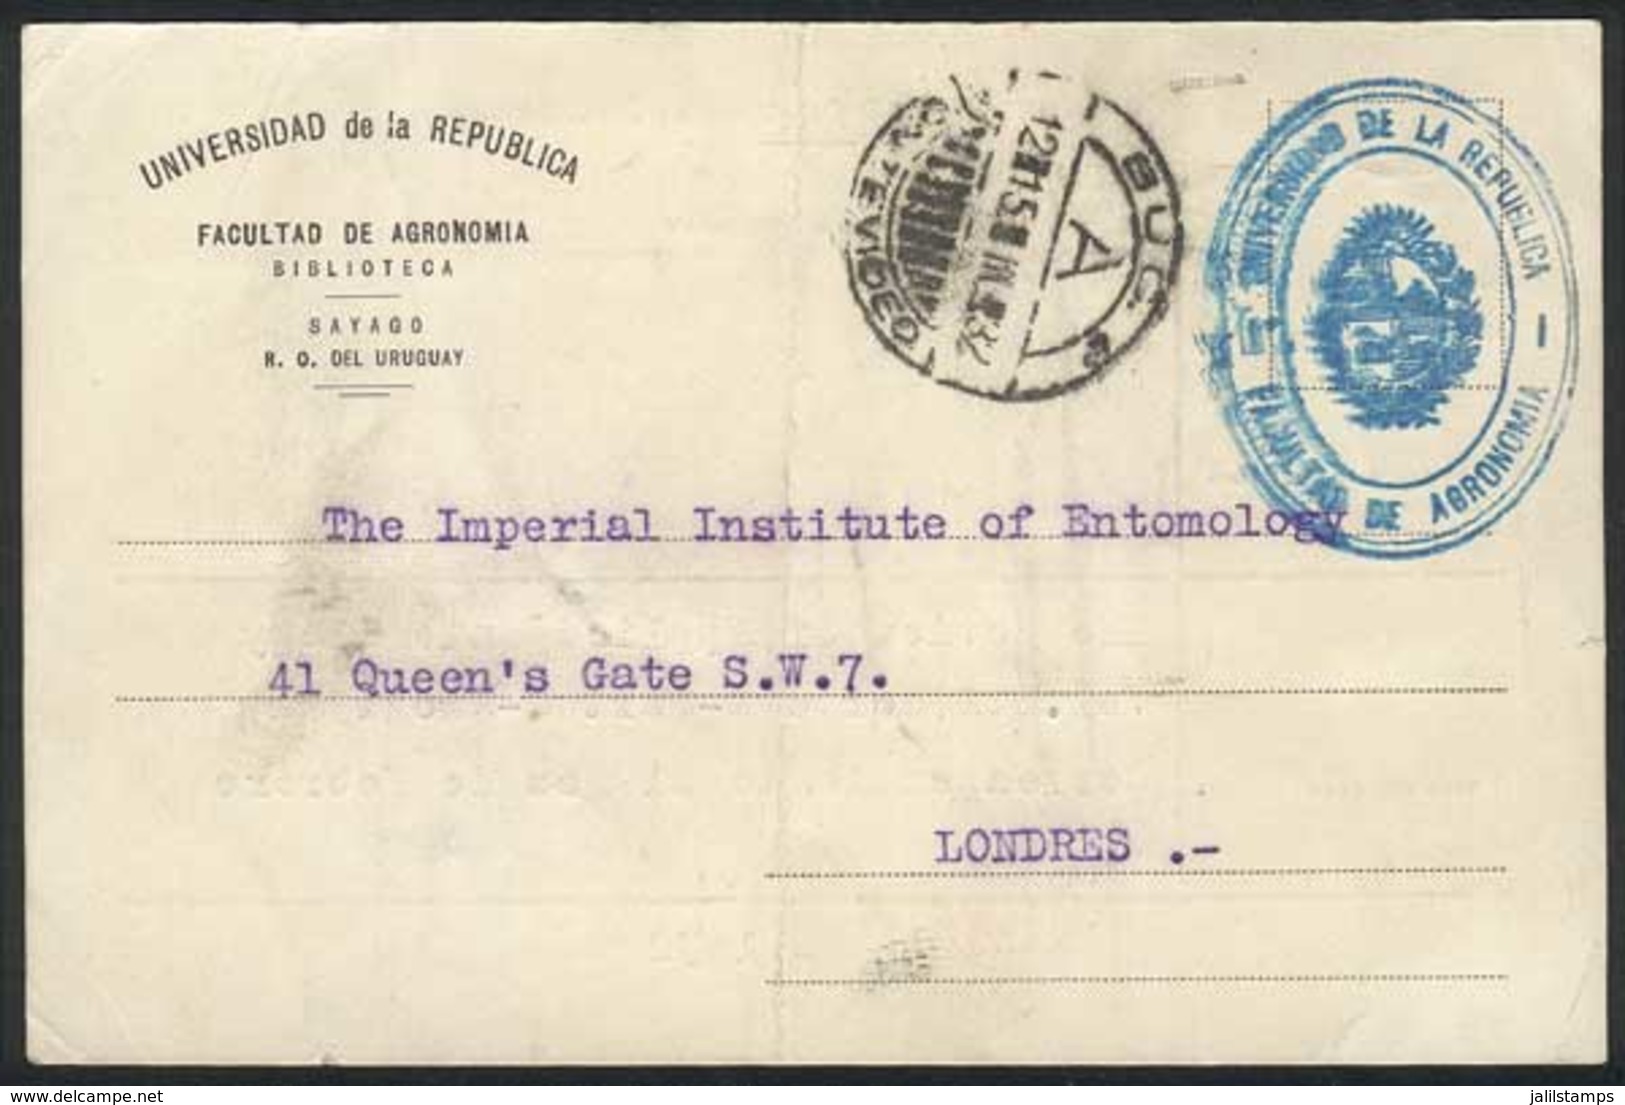 URUGUAY: Card Of The Department Of Agronomy Of The University Of The Republic, Sent Stampless To England On 14/MAR/1932, - Uruguay